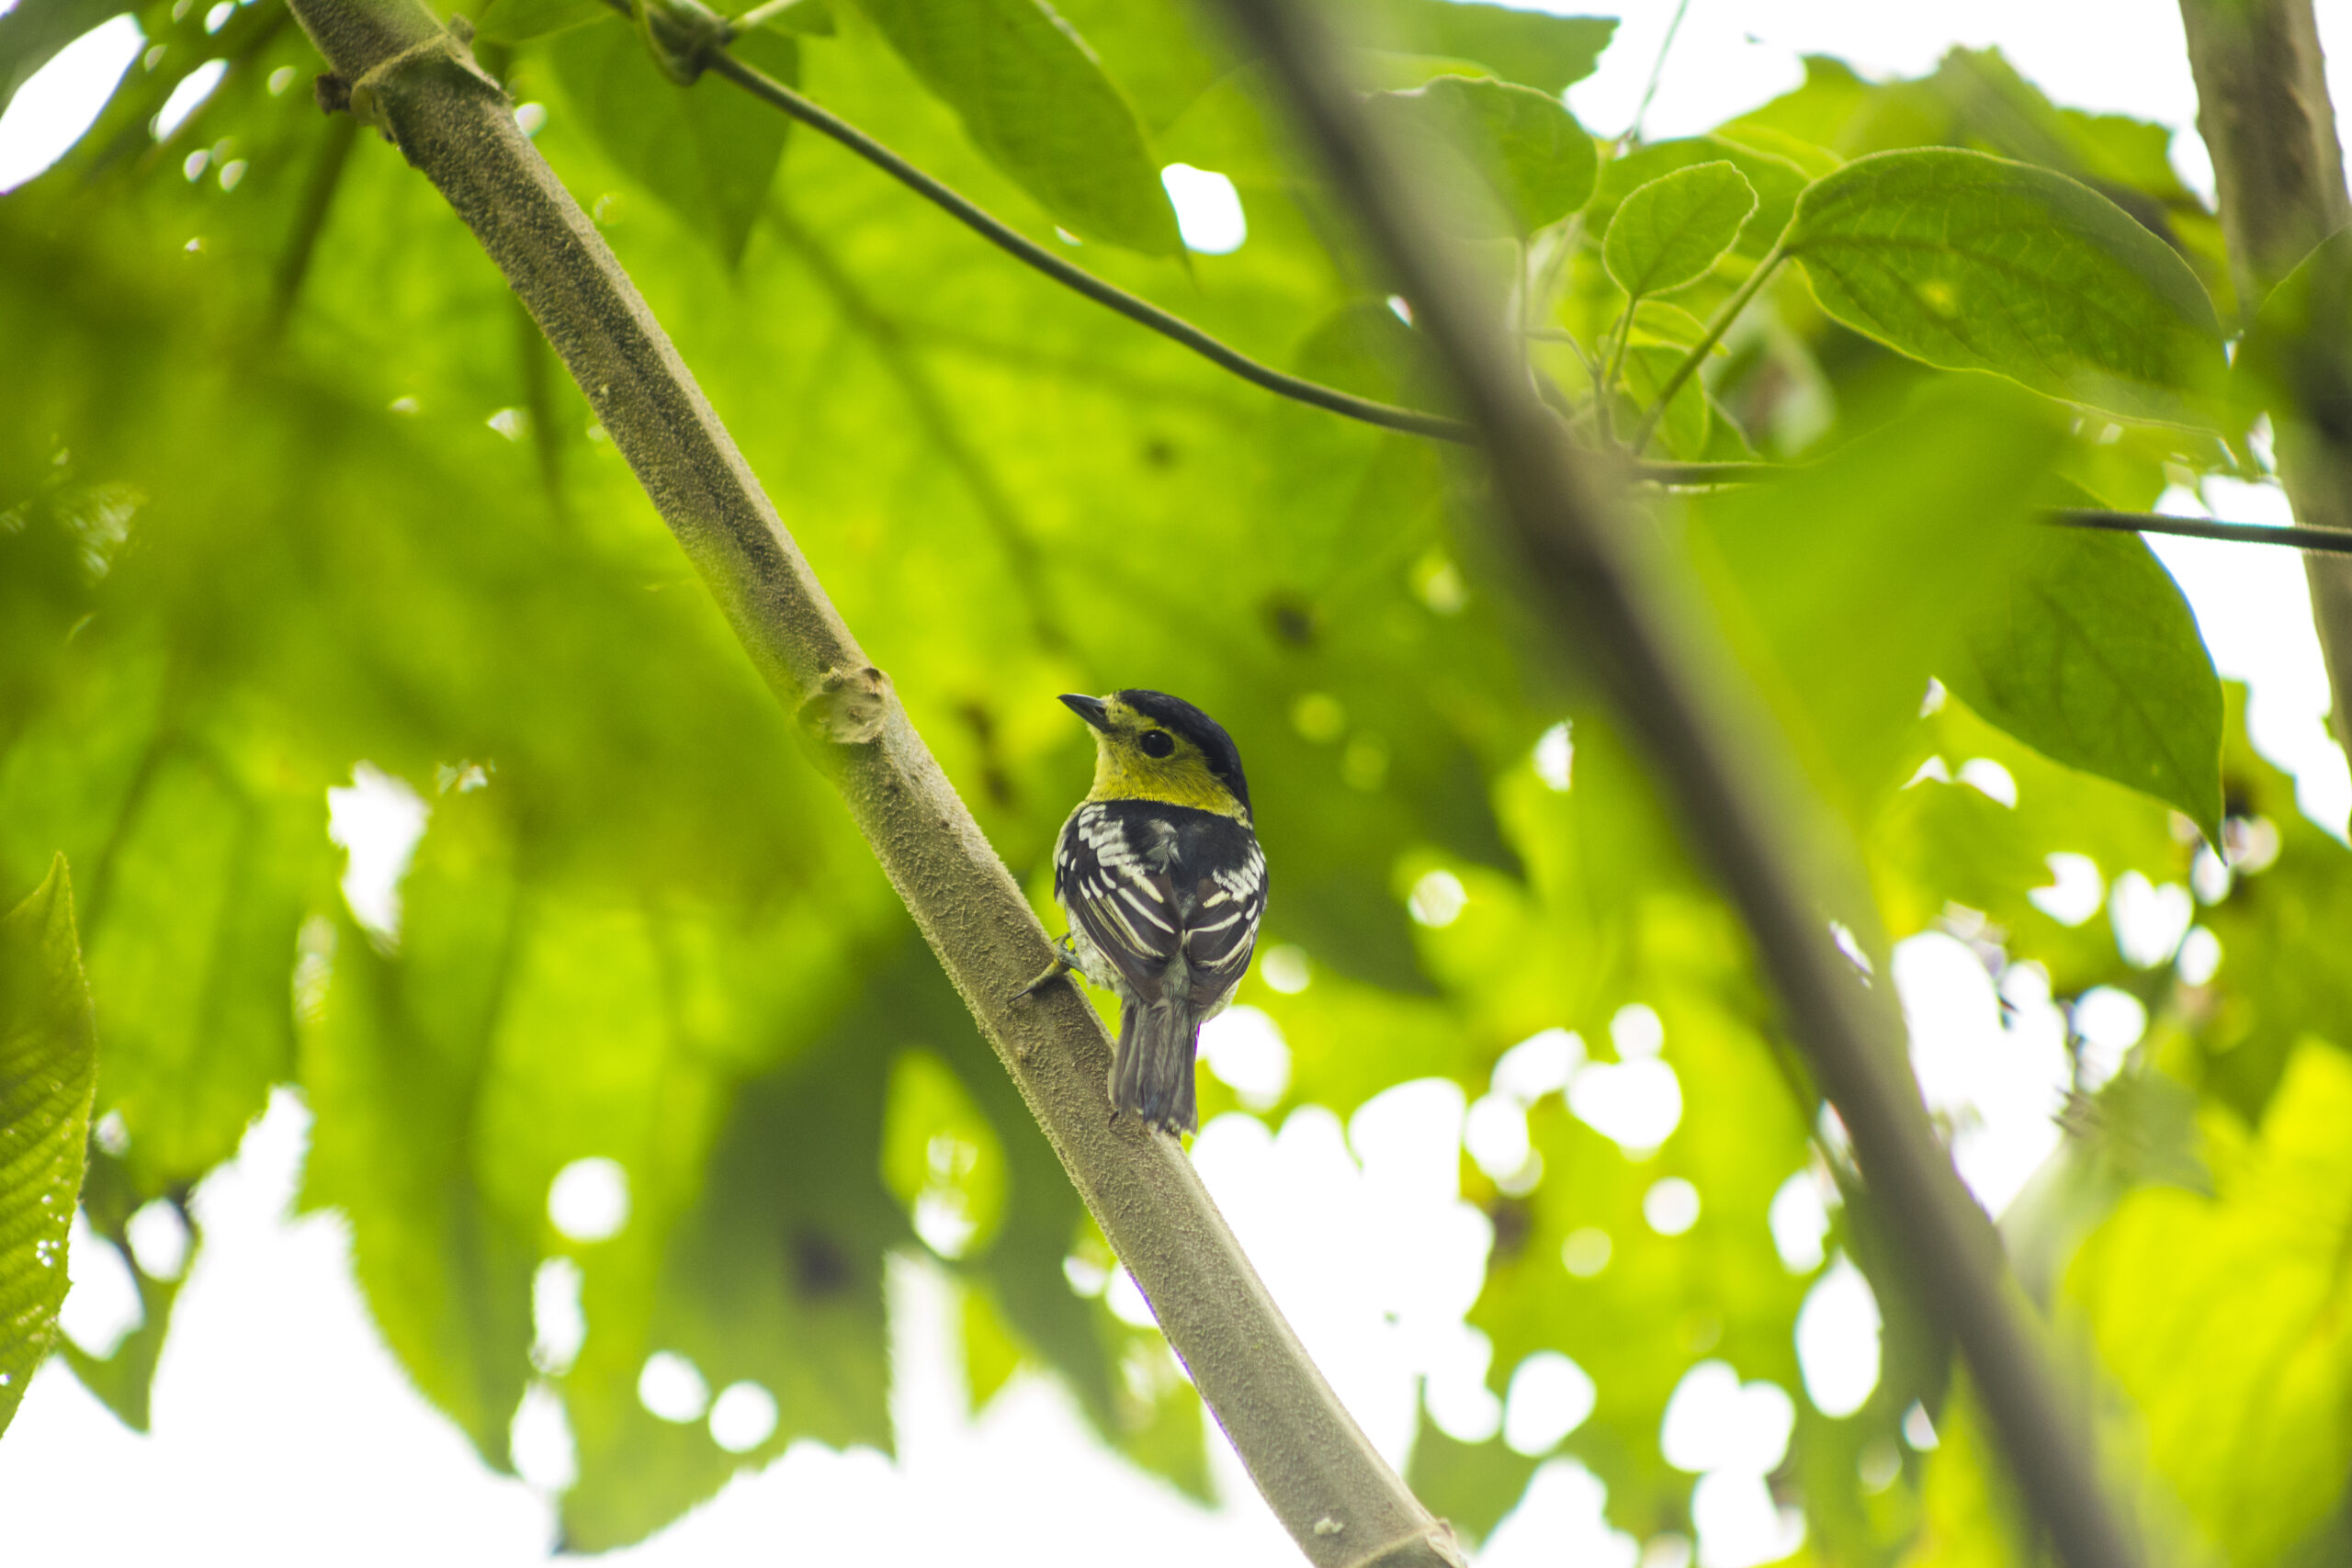 rear-view-songbird-perched-tree-branch-rainforest